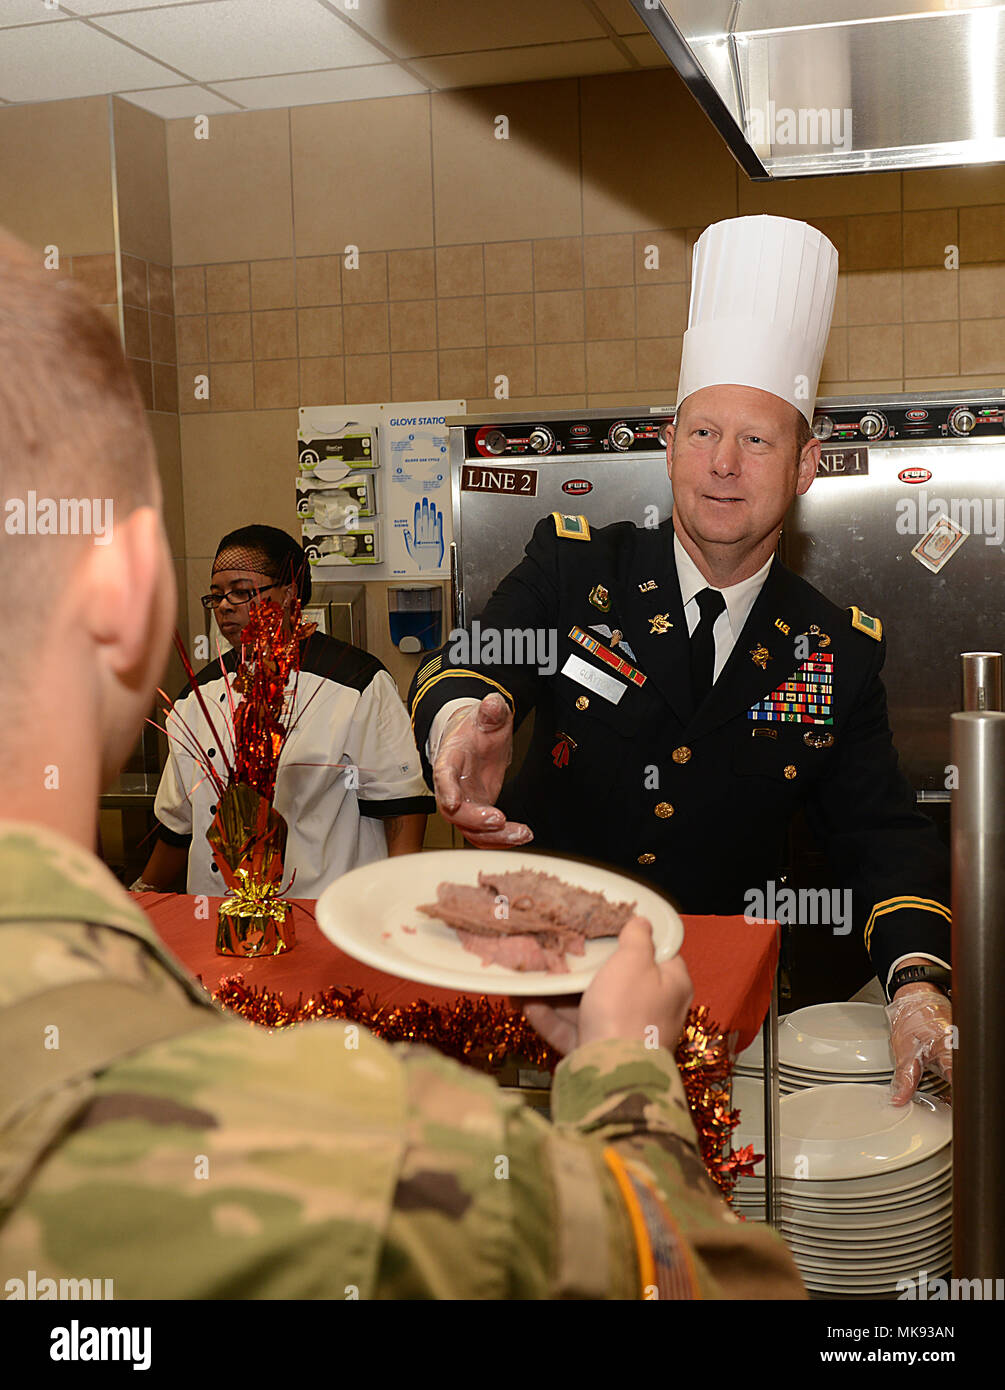 U.S. Army Col. Ralph Clayton III, 733rd Mission Support Group commander, serves Thanksgiving lunch at the Warrior Cafe on Joint Base Langley-Eustis, Va., Nov. 23, 2017. The Thanksgiving meal included traditional dishes such as turkey, ham, potatoes and an array of desserts, provided by the dining facilities. (U.S. Air Force photo by Staff Sgt. Teresa J. Cleveland) Stock Photo